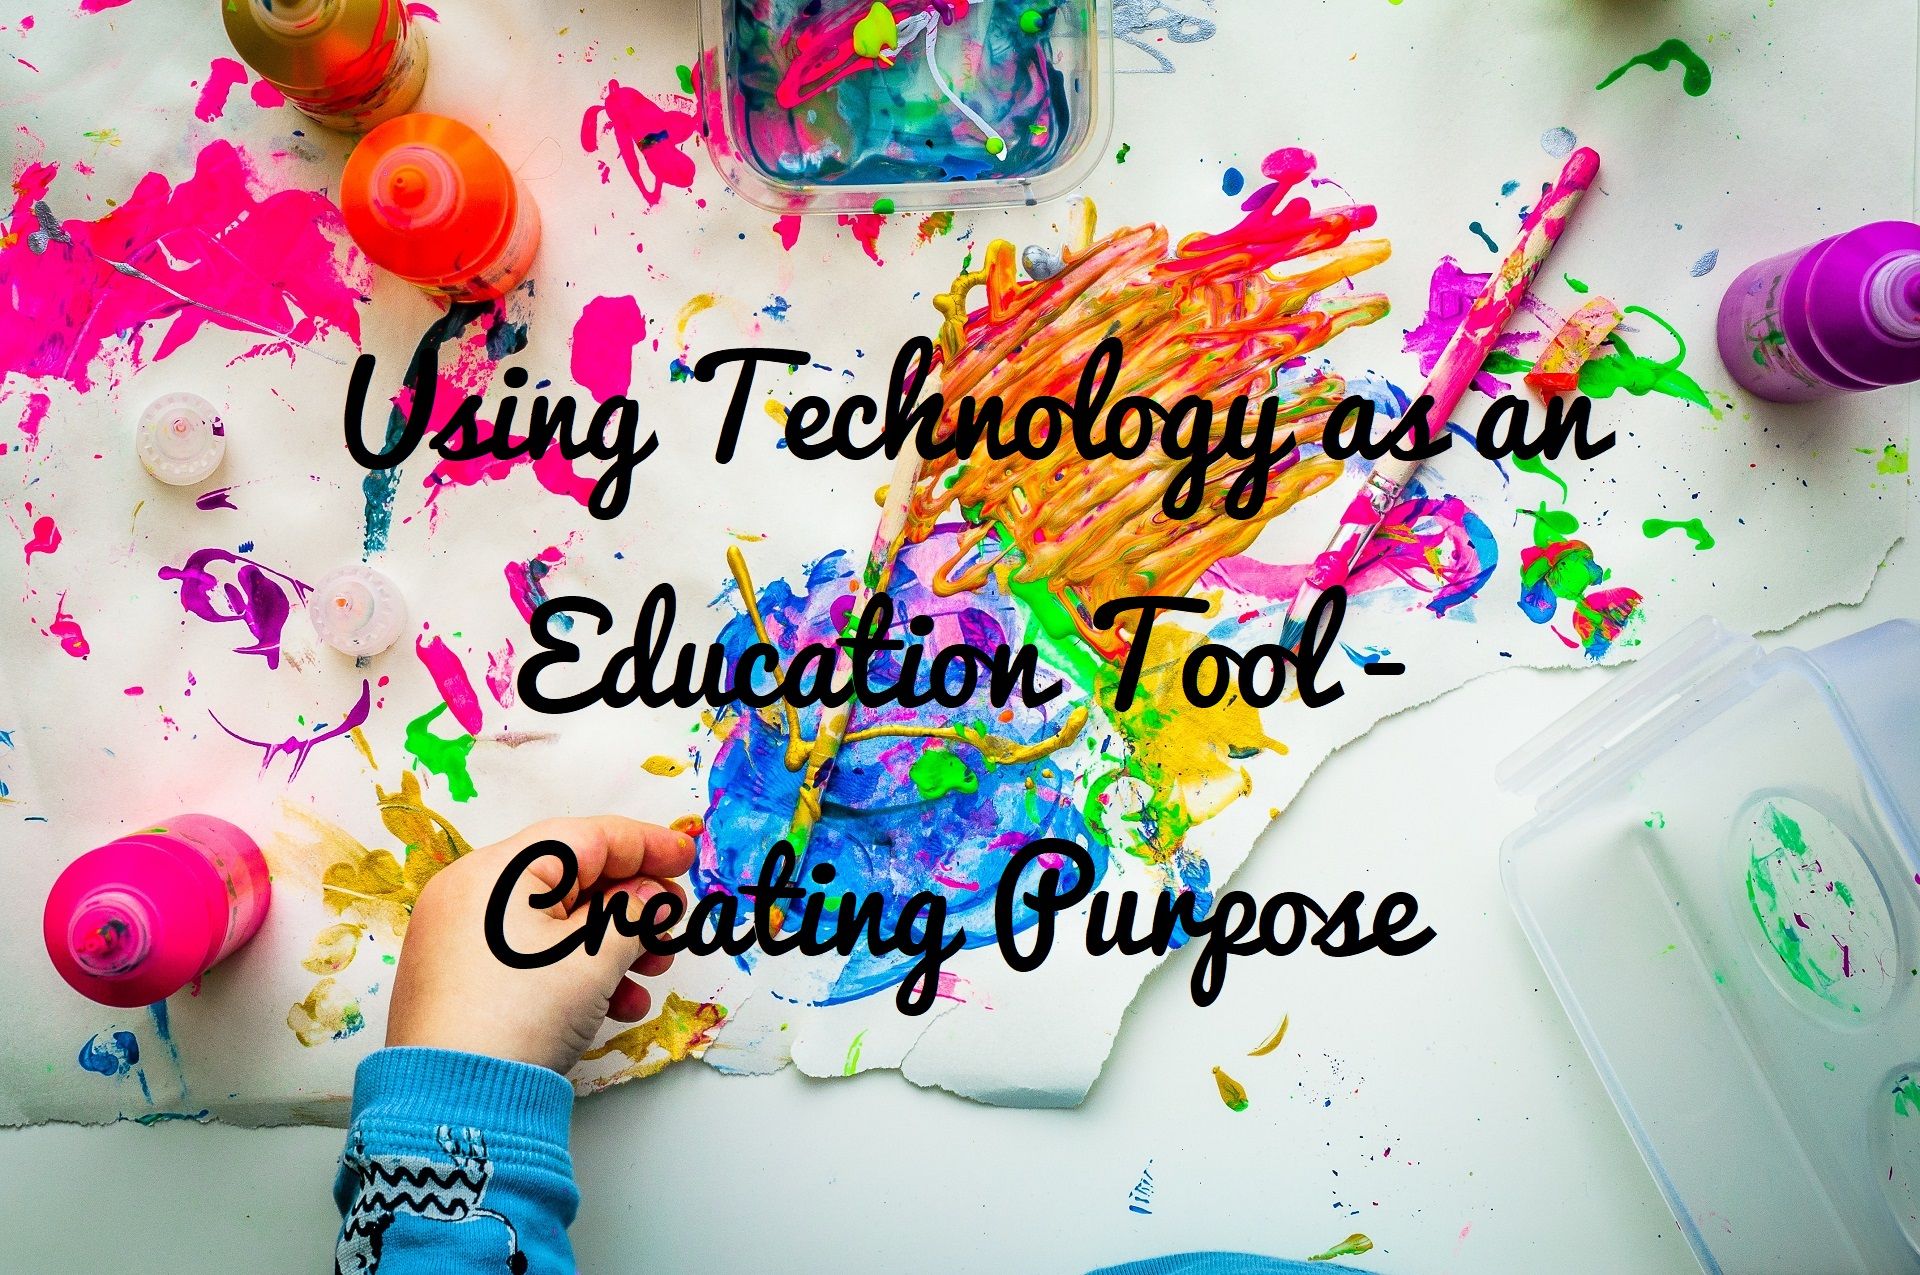 Using Technology as an Education Tool - Creating Purpose